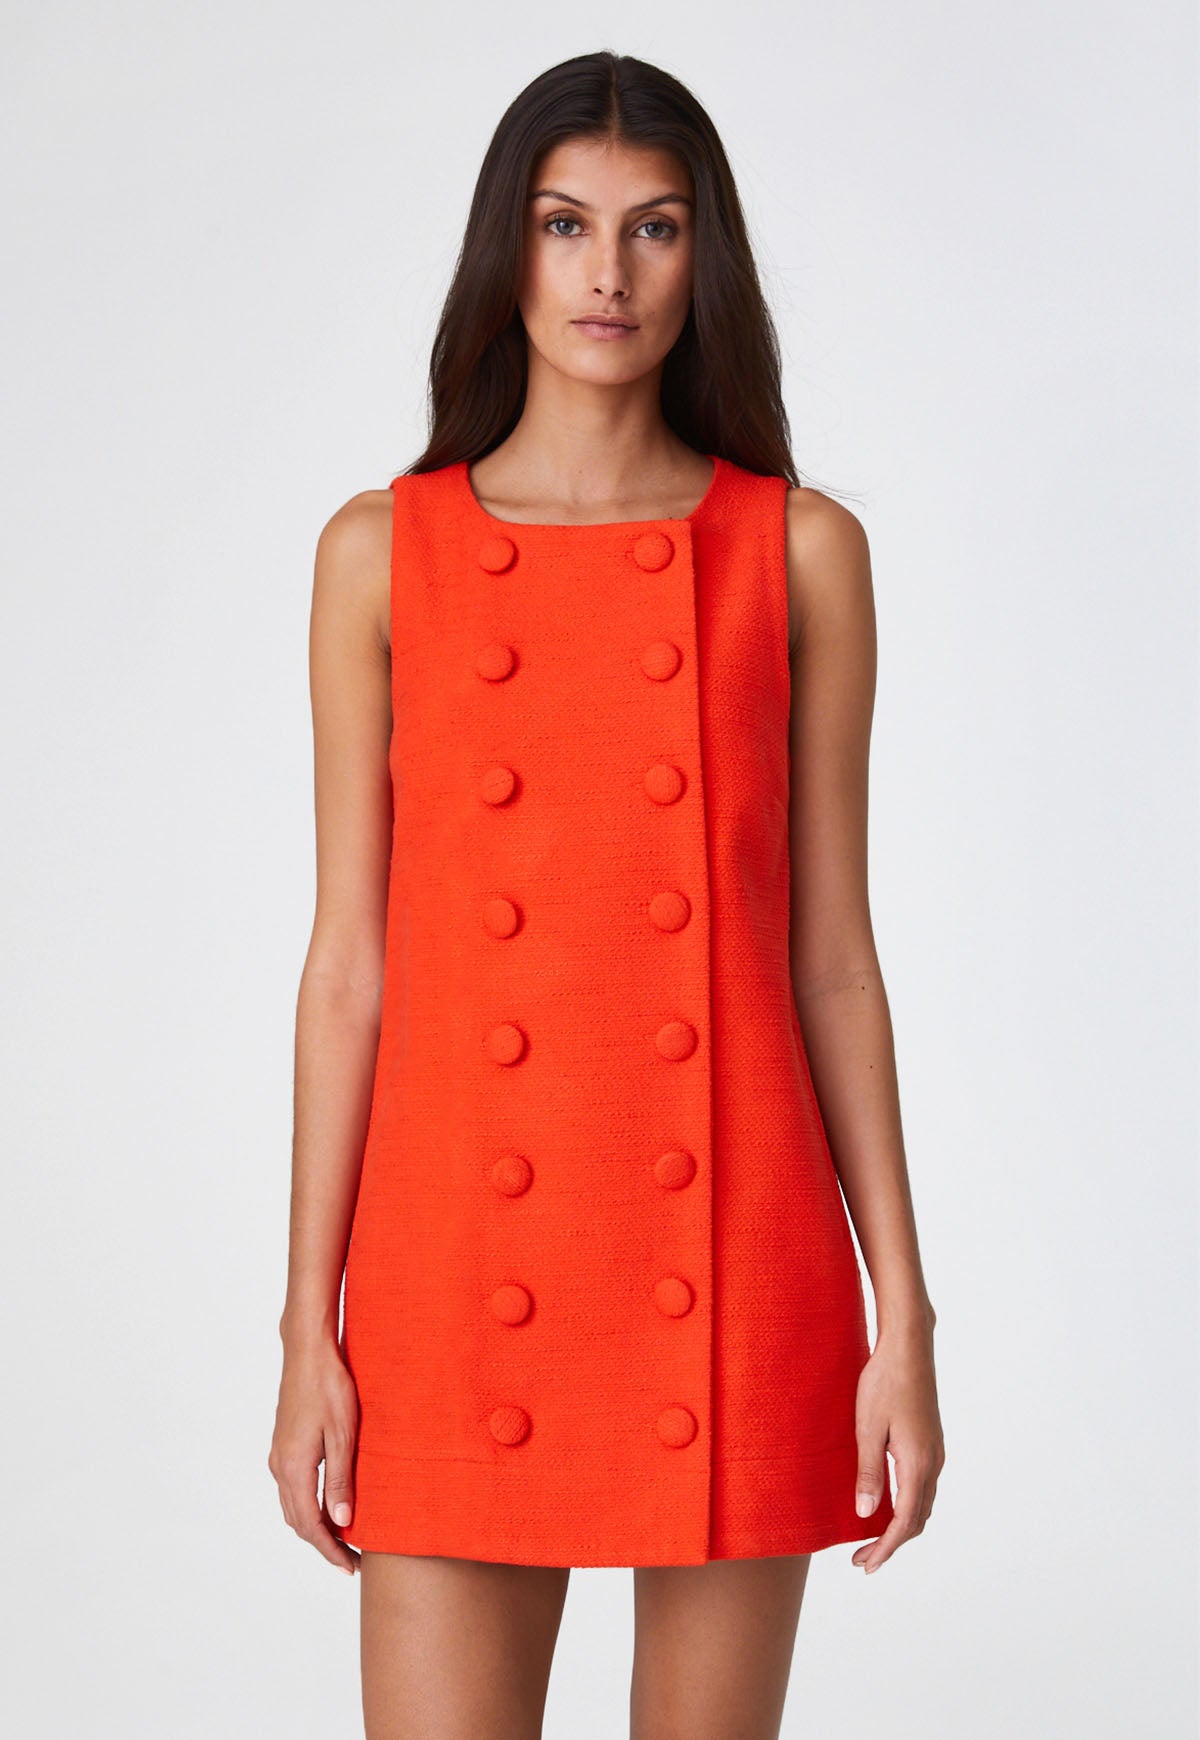 THE DOUBLE BREASTED MINI DRESS in TOMATO TEXTURED COTTON